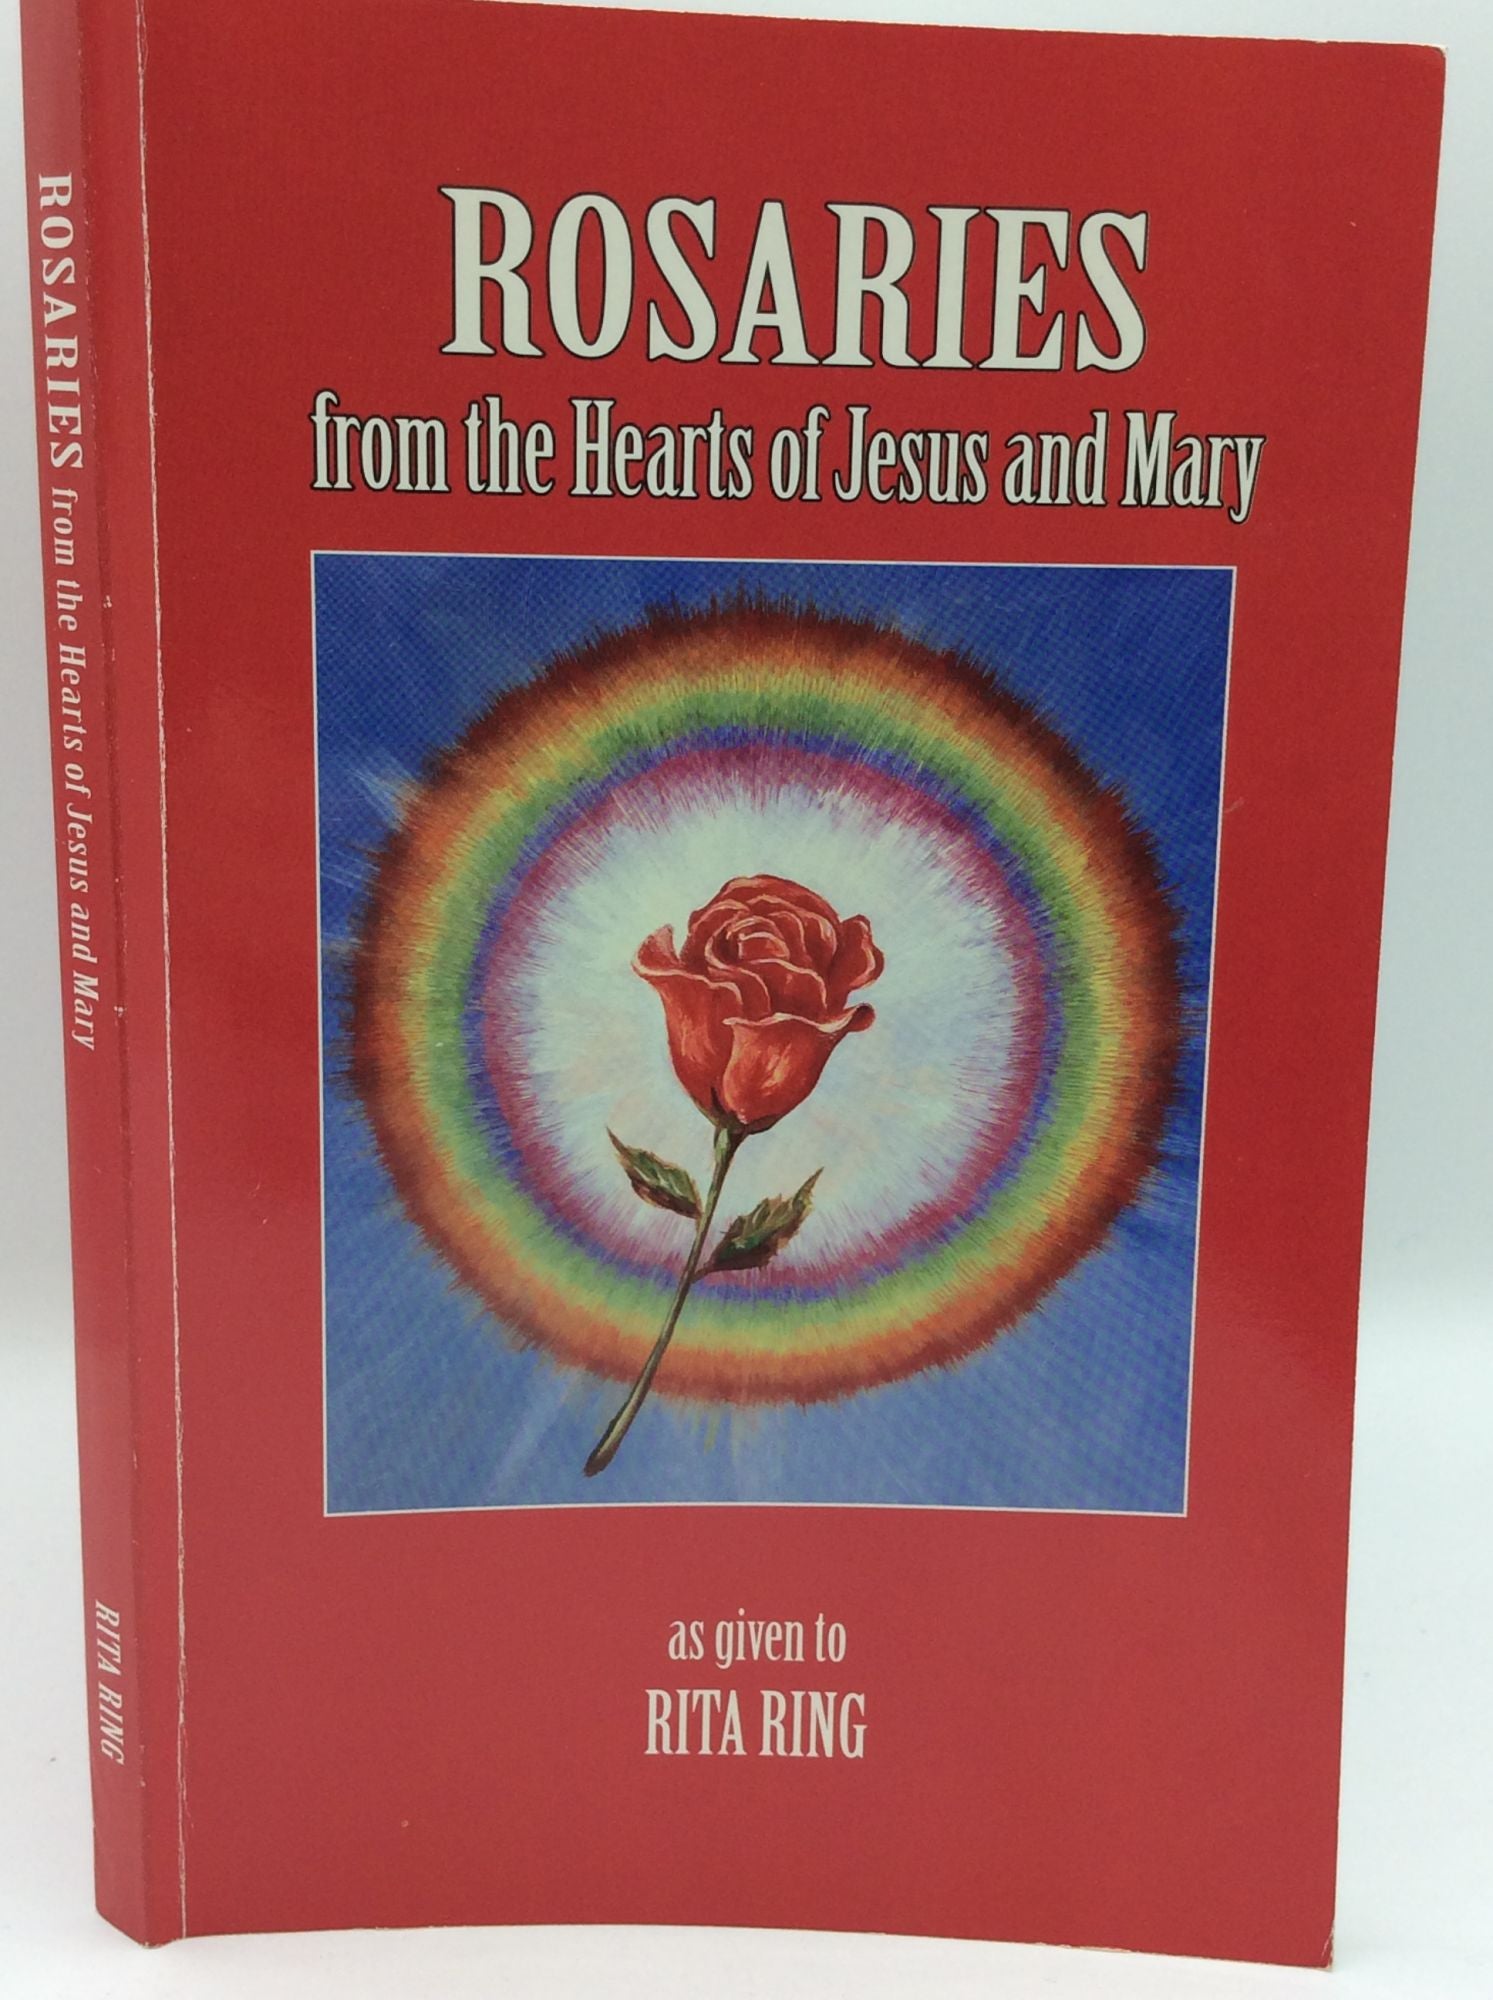 Rita Ring - Rosary Meditations for Parents and Children from the Hearts of Jesus and Mary